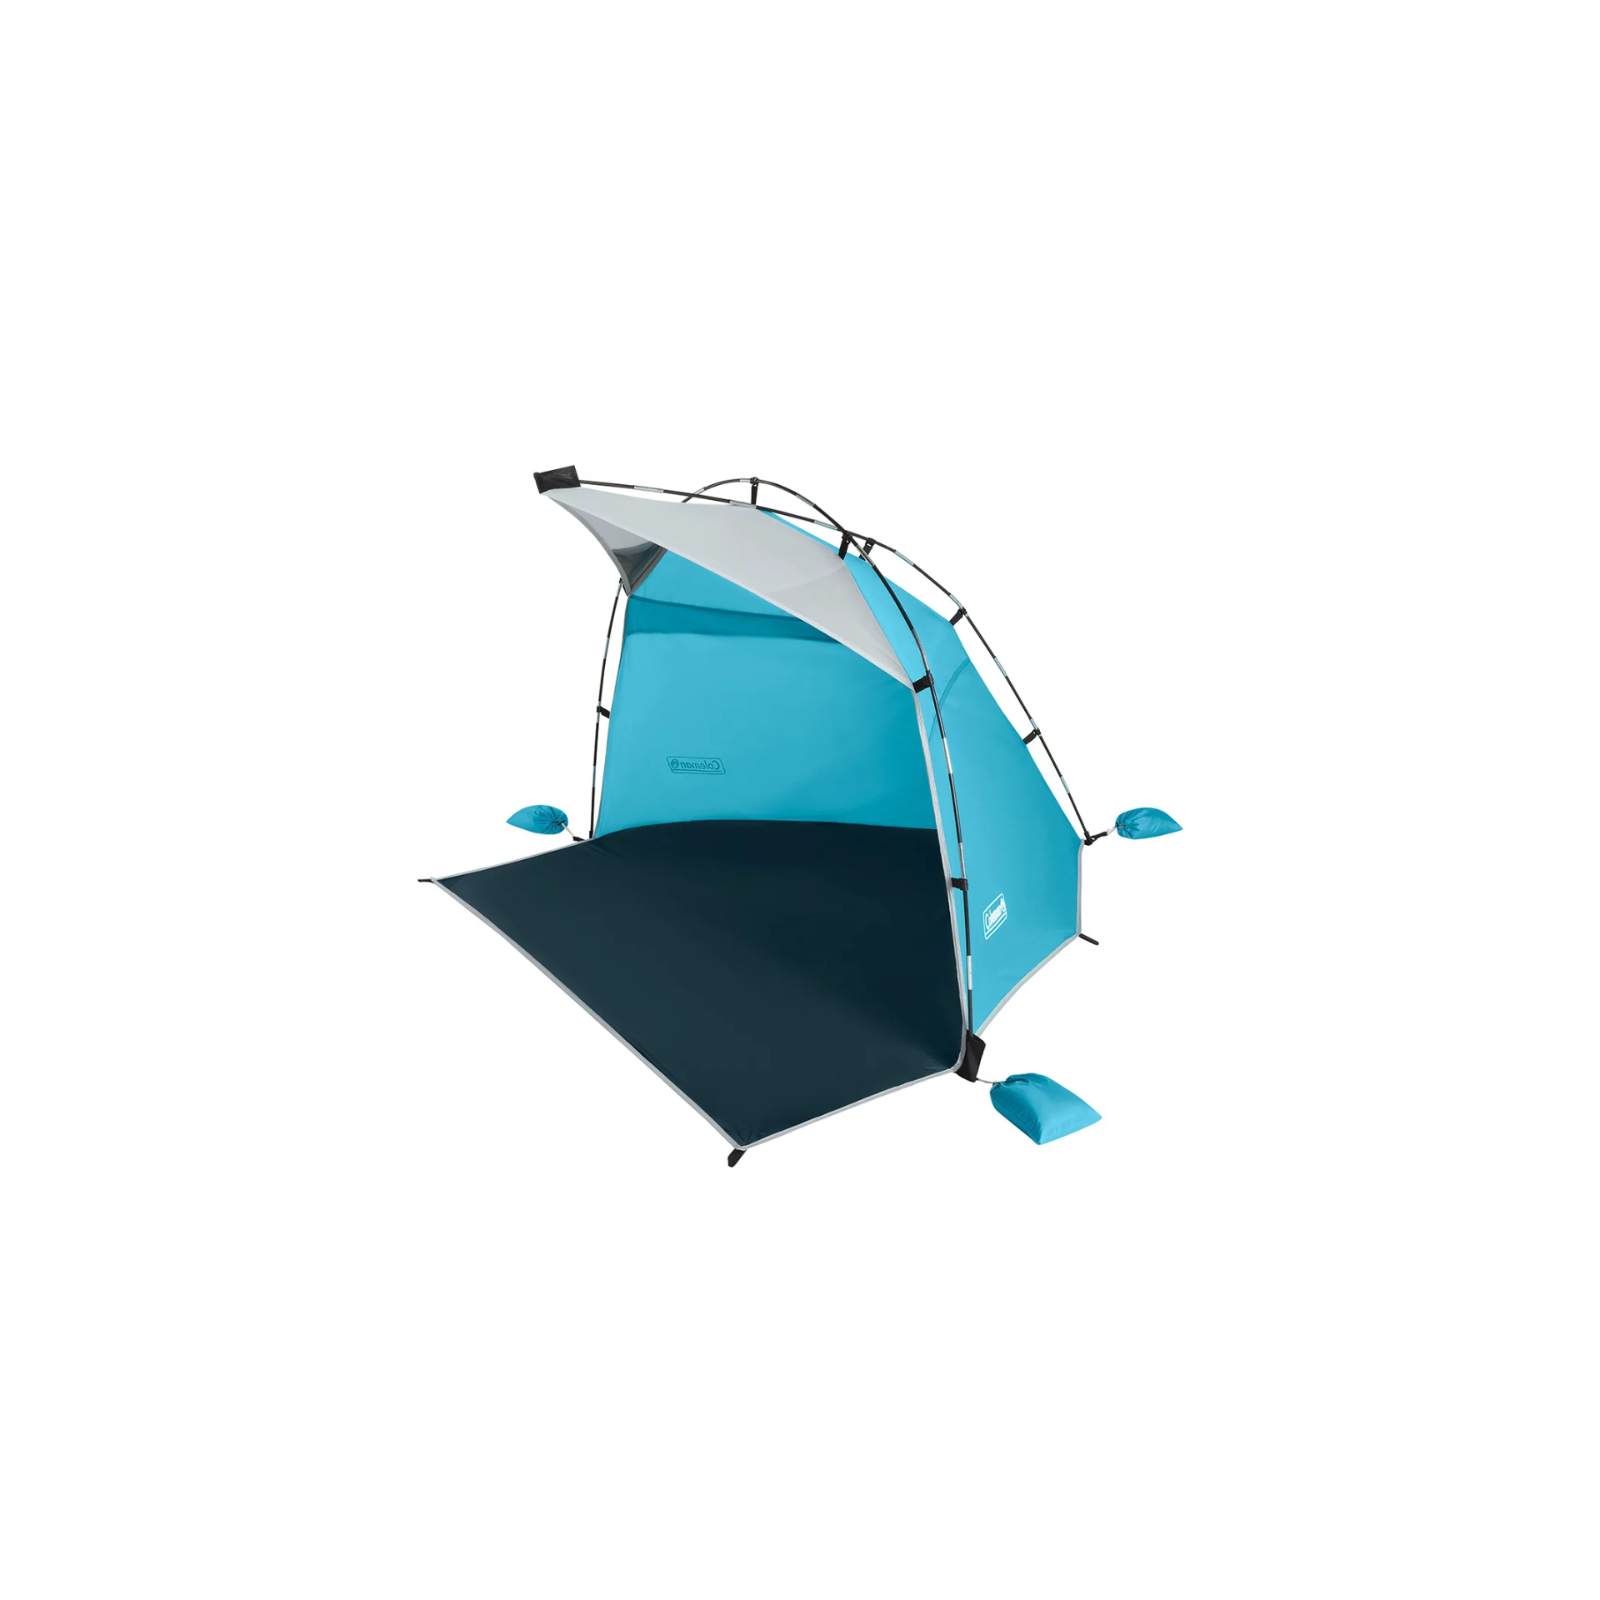 Heading out for an impromptu beach or park day? Grab the Coleman Skyshade Small Compact Beach Shade for sun protection to keep the fun going all day. It's compact, weighs just 3 lbs., and sets up easi...